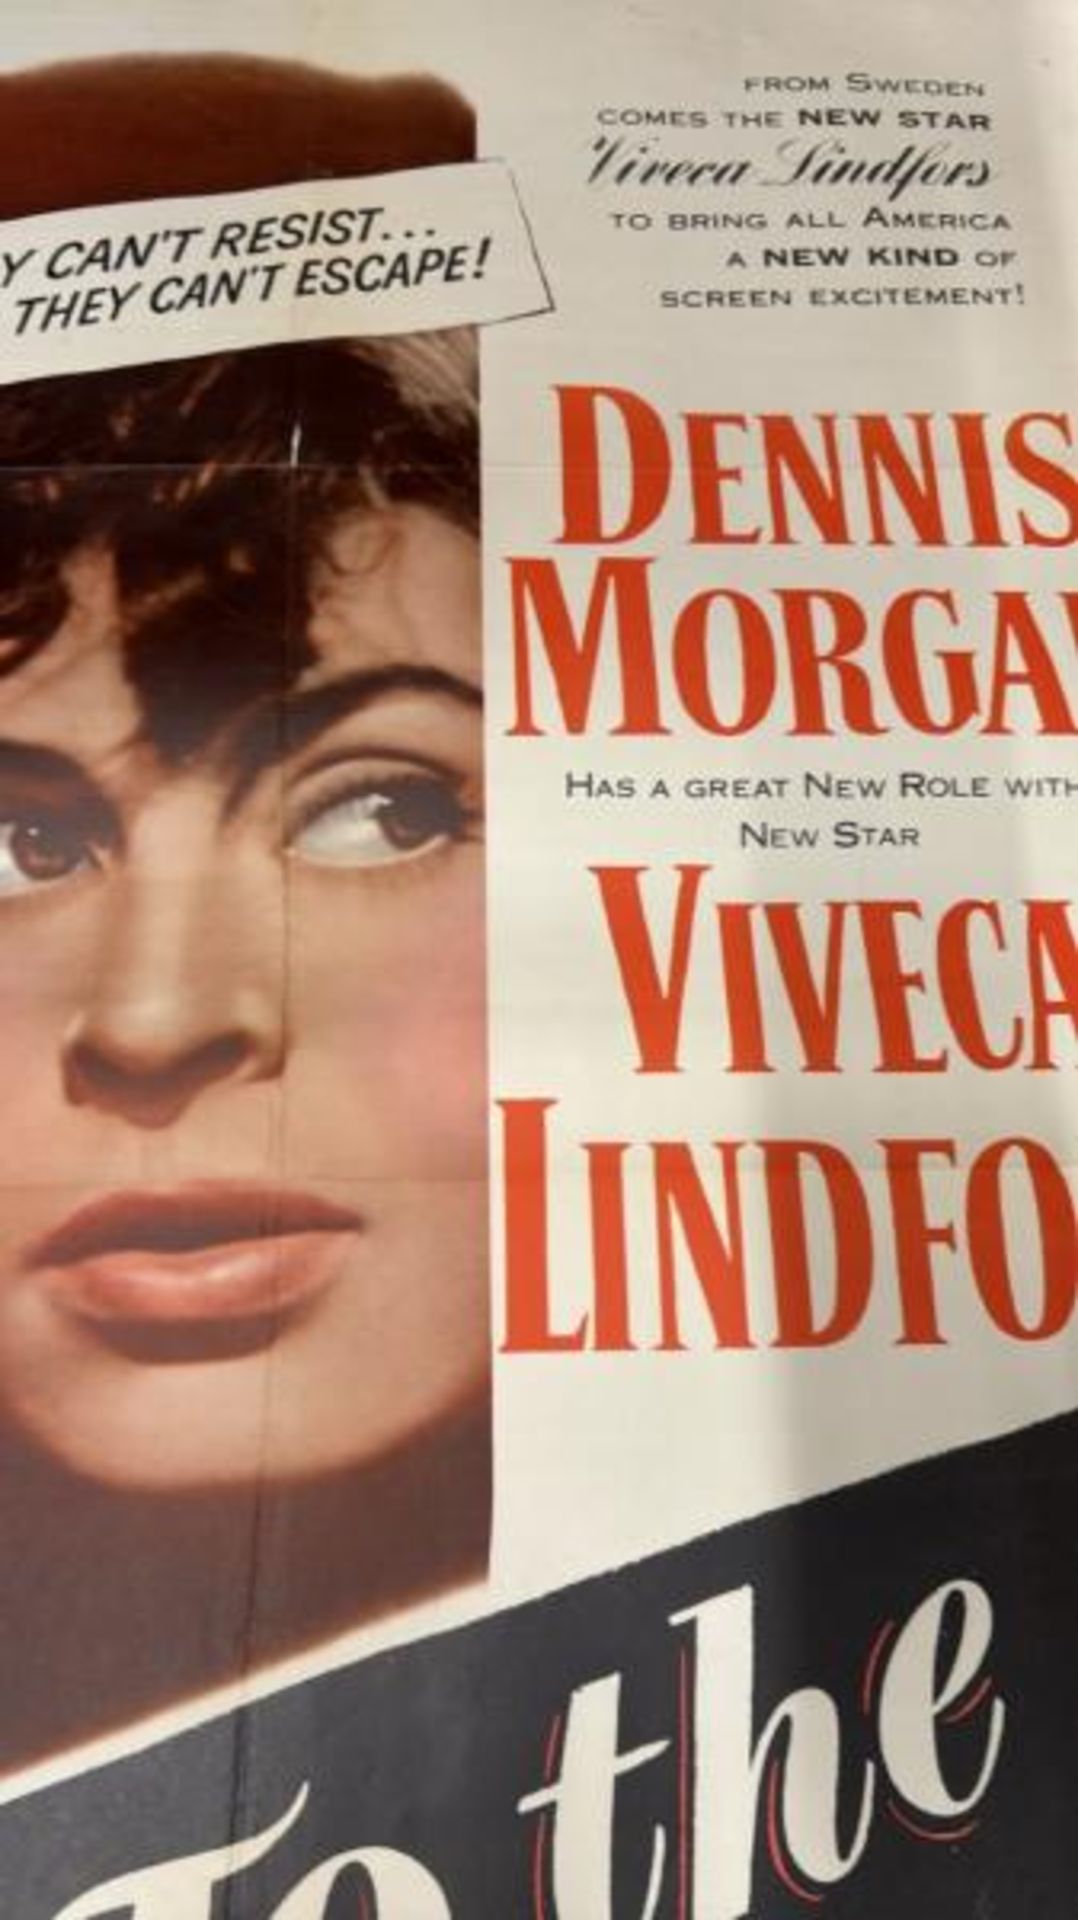 TO THE VICTOR STARRING DENNIS MORGAN, ORIGINAL FILM POSTER, 48/847, MADE IN THE USA, 68.5CM X 105CM - Image 4 of 4